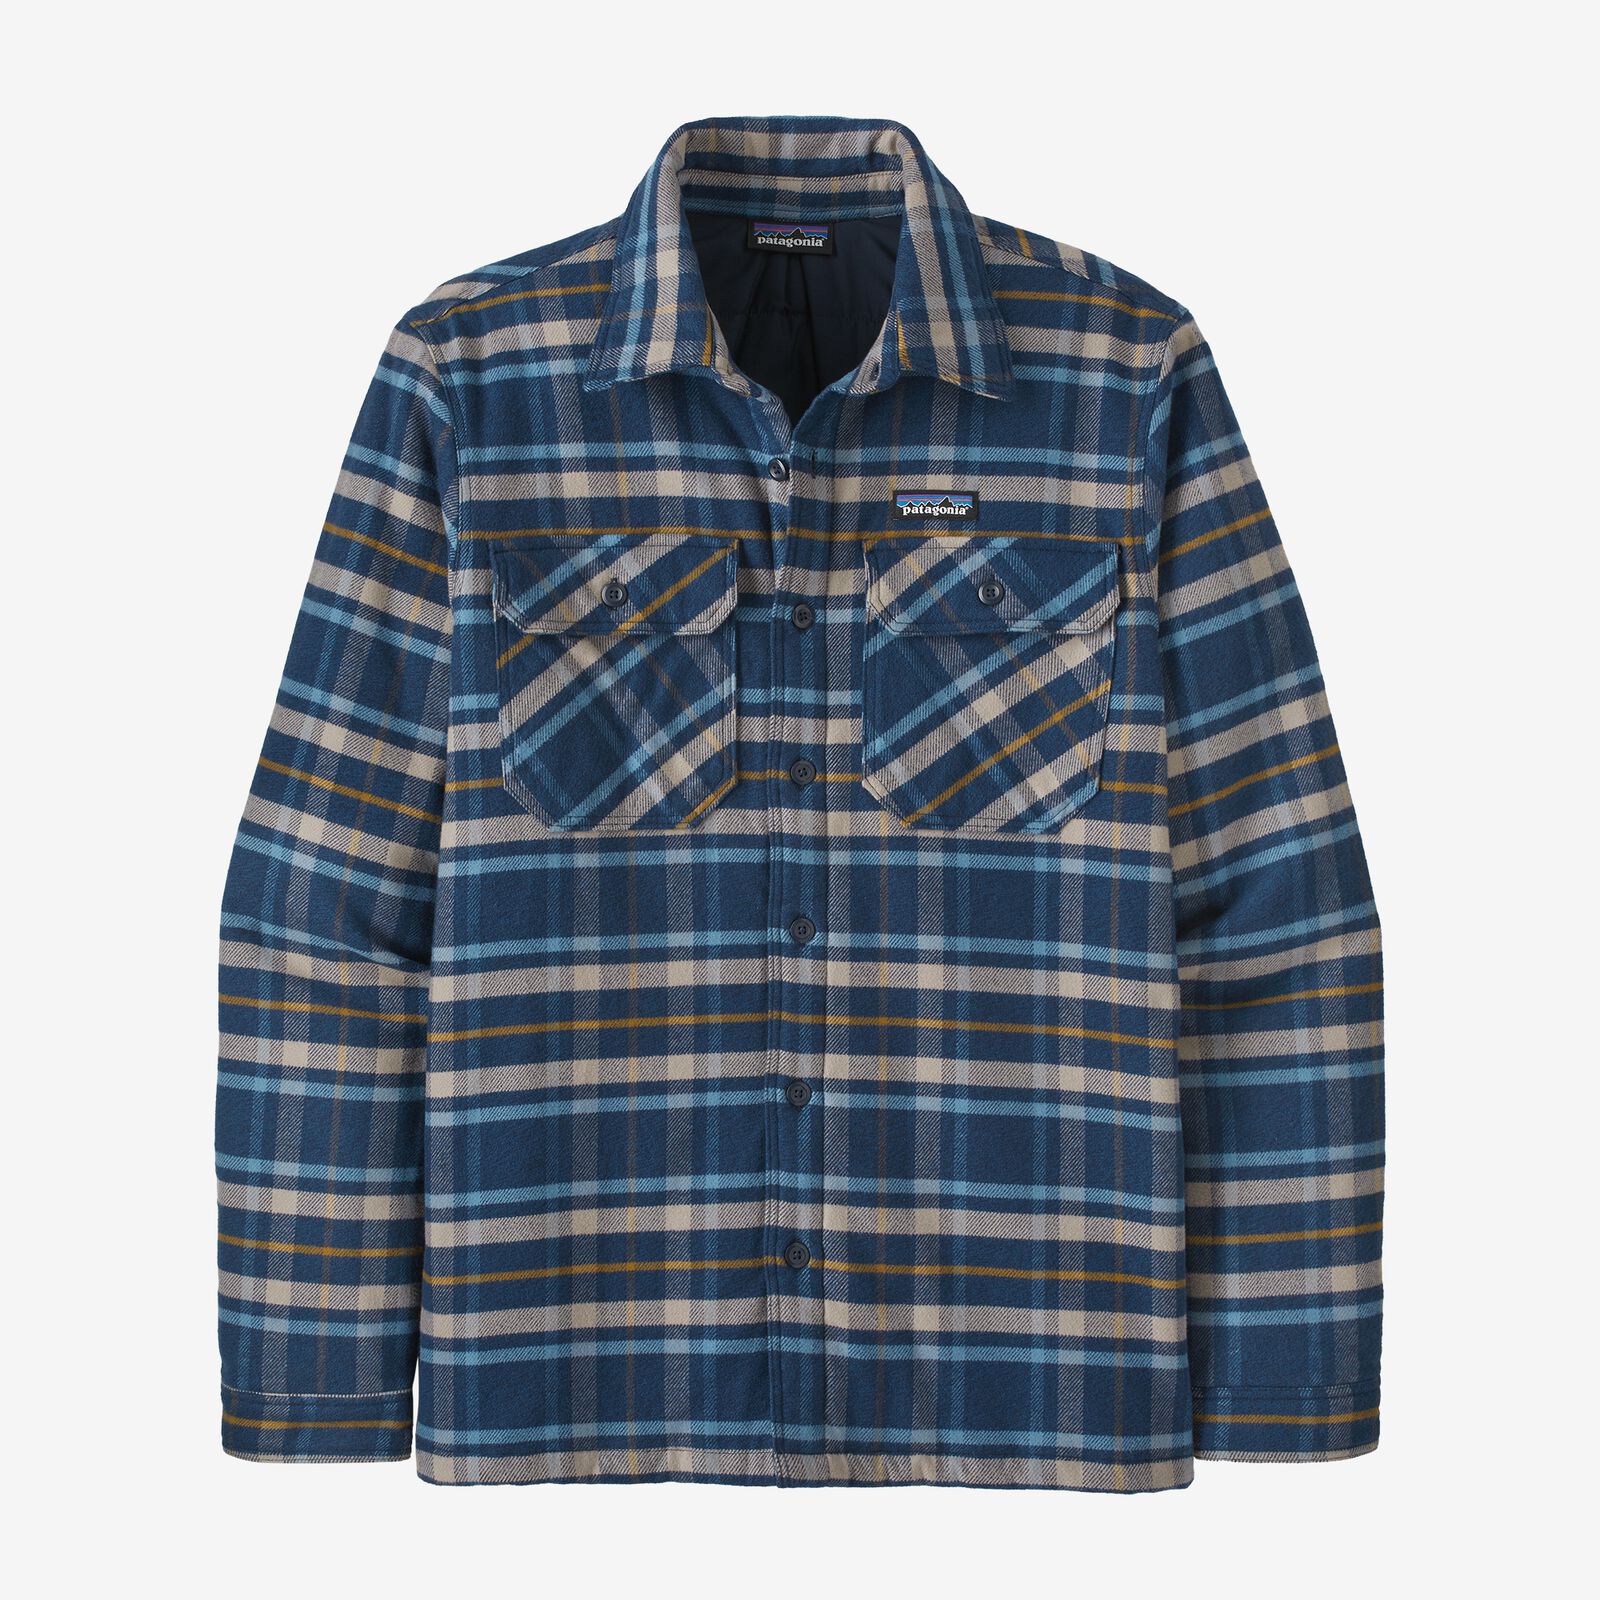 Patagonia Men's Insulated Fjord Flannel Jacket